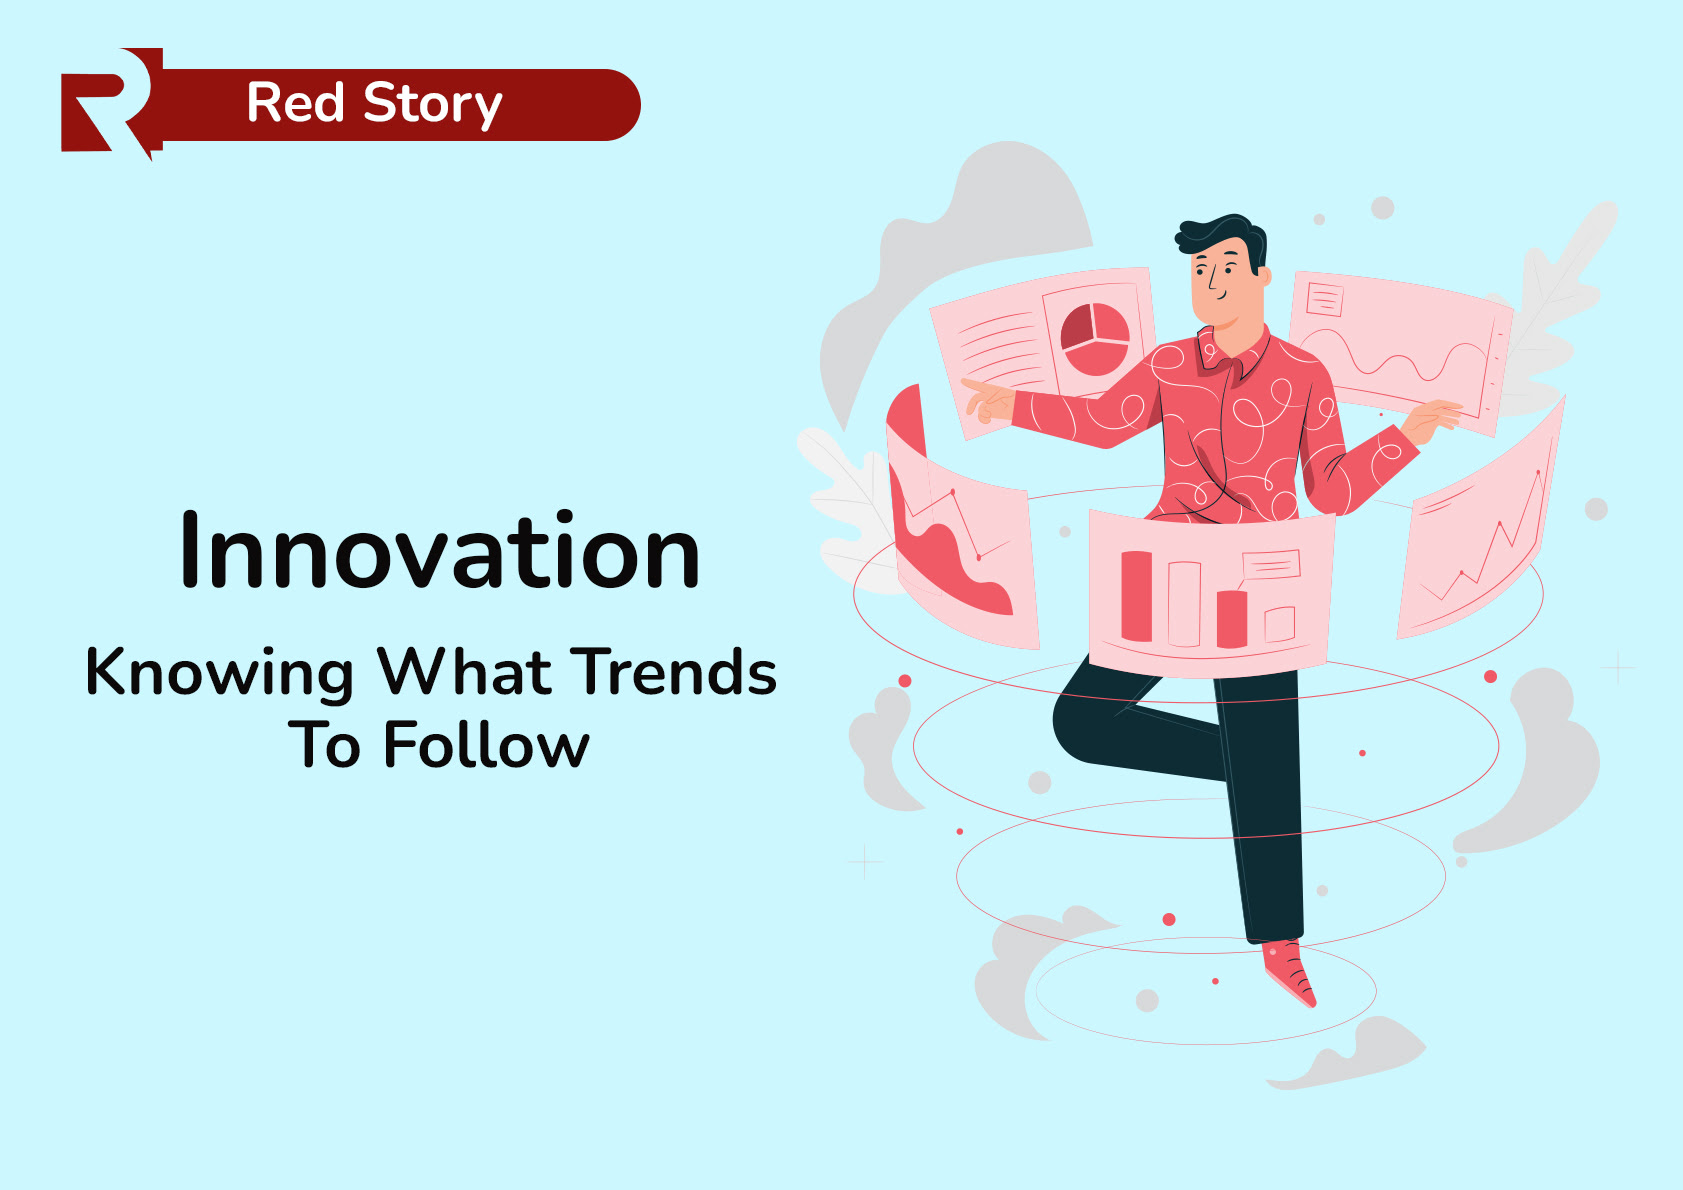 Innovation: knowing what trends to follow